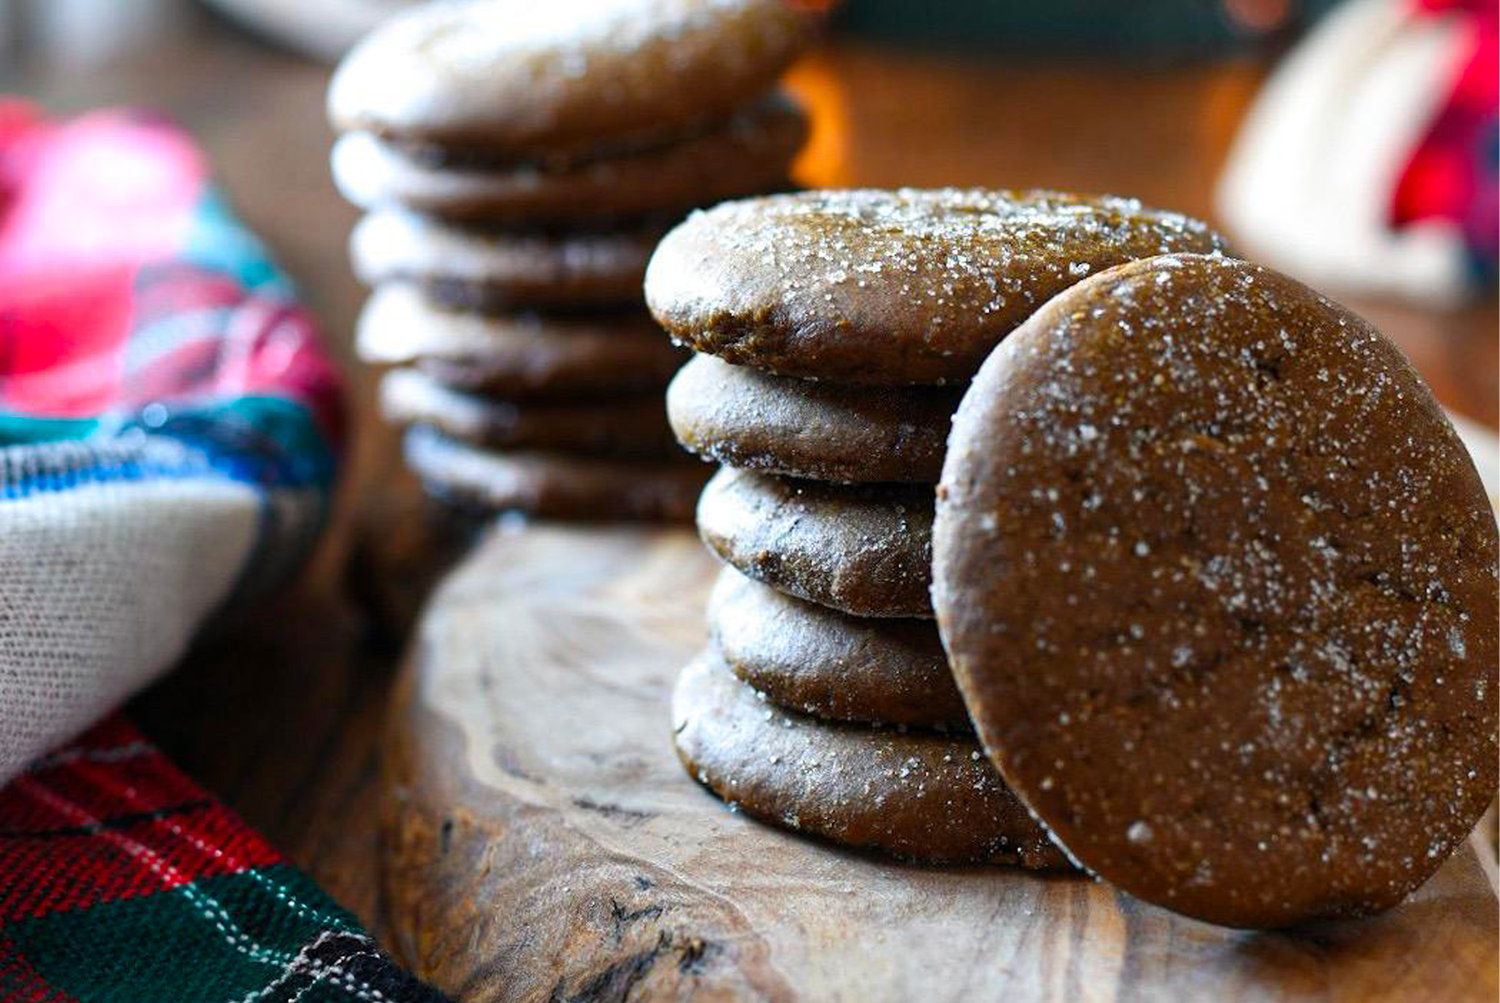 Old-fashioned gingersnaps perfect for gifting (or dunking!)